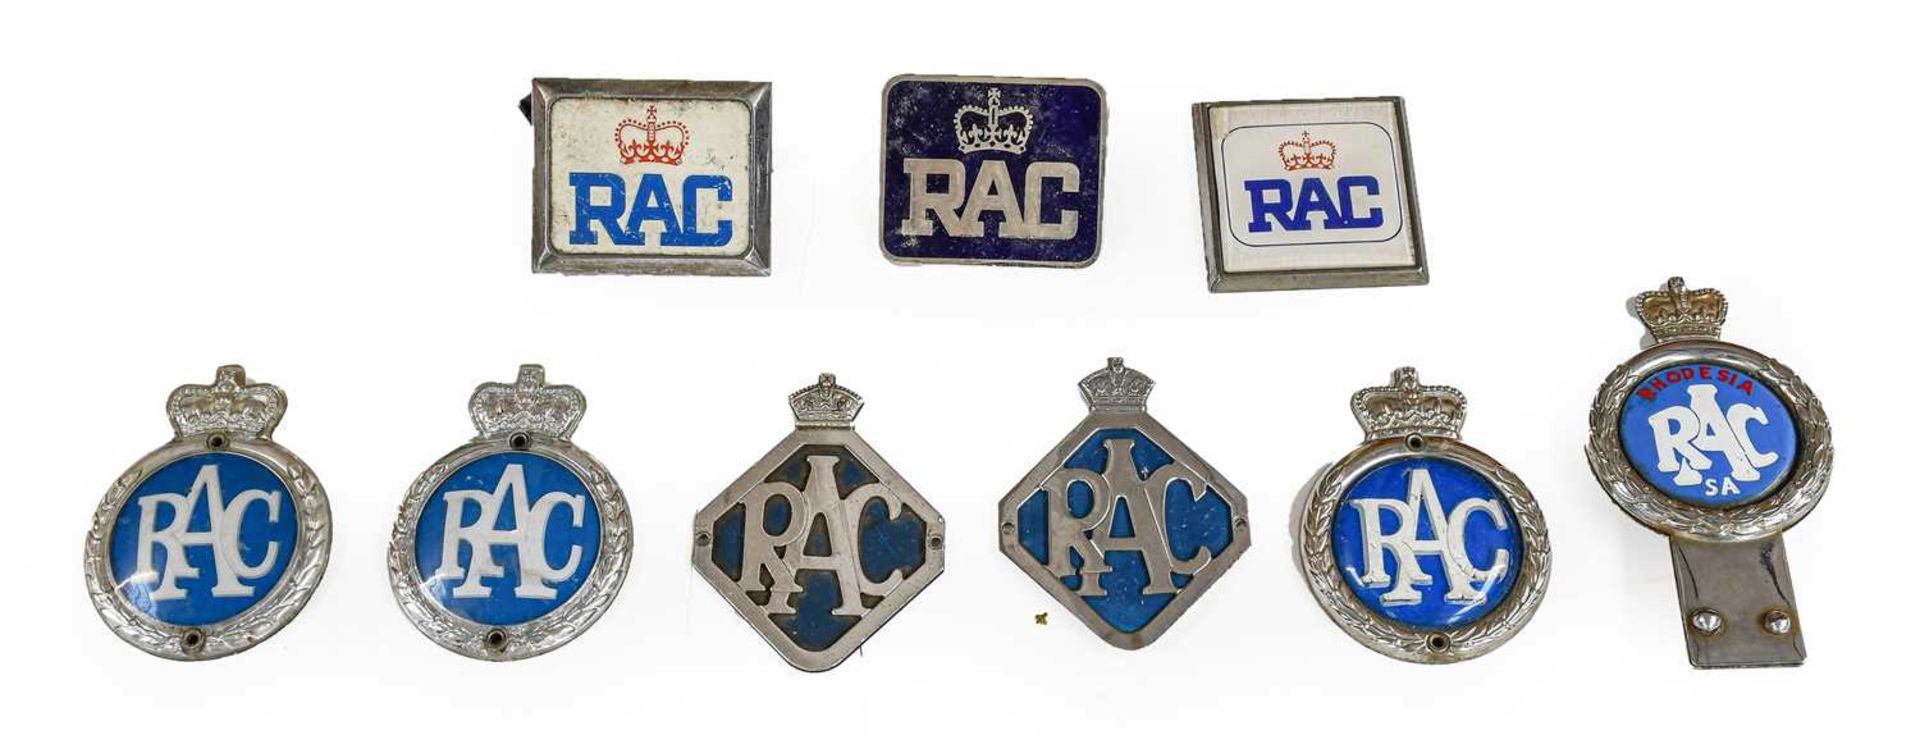 Nine RAC Chromed Metal and Plastic Members’ Badges, including a blue enamelled example and a